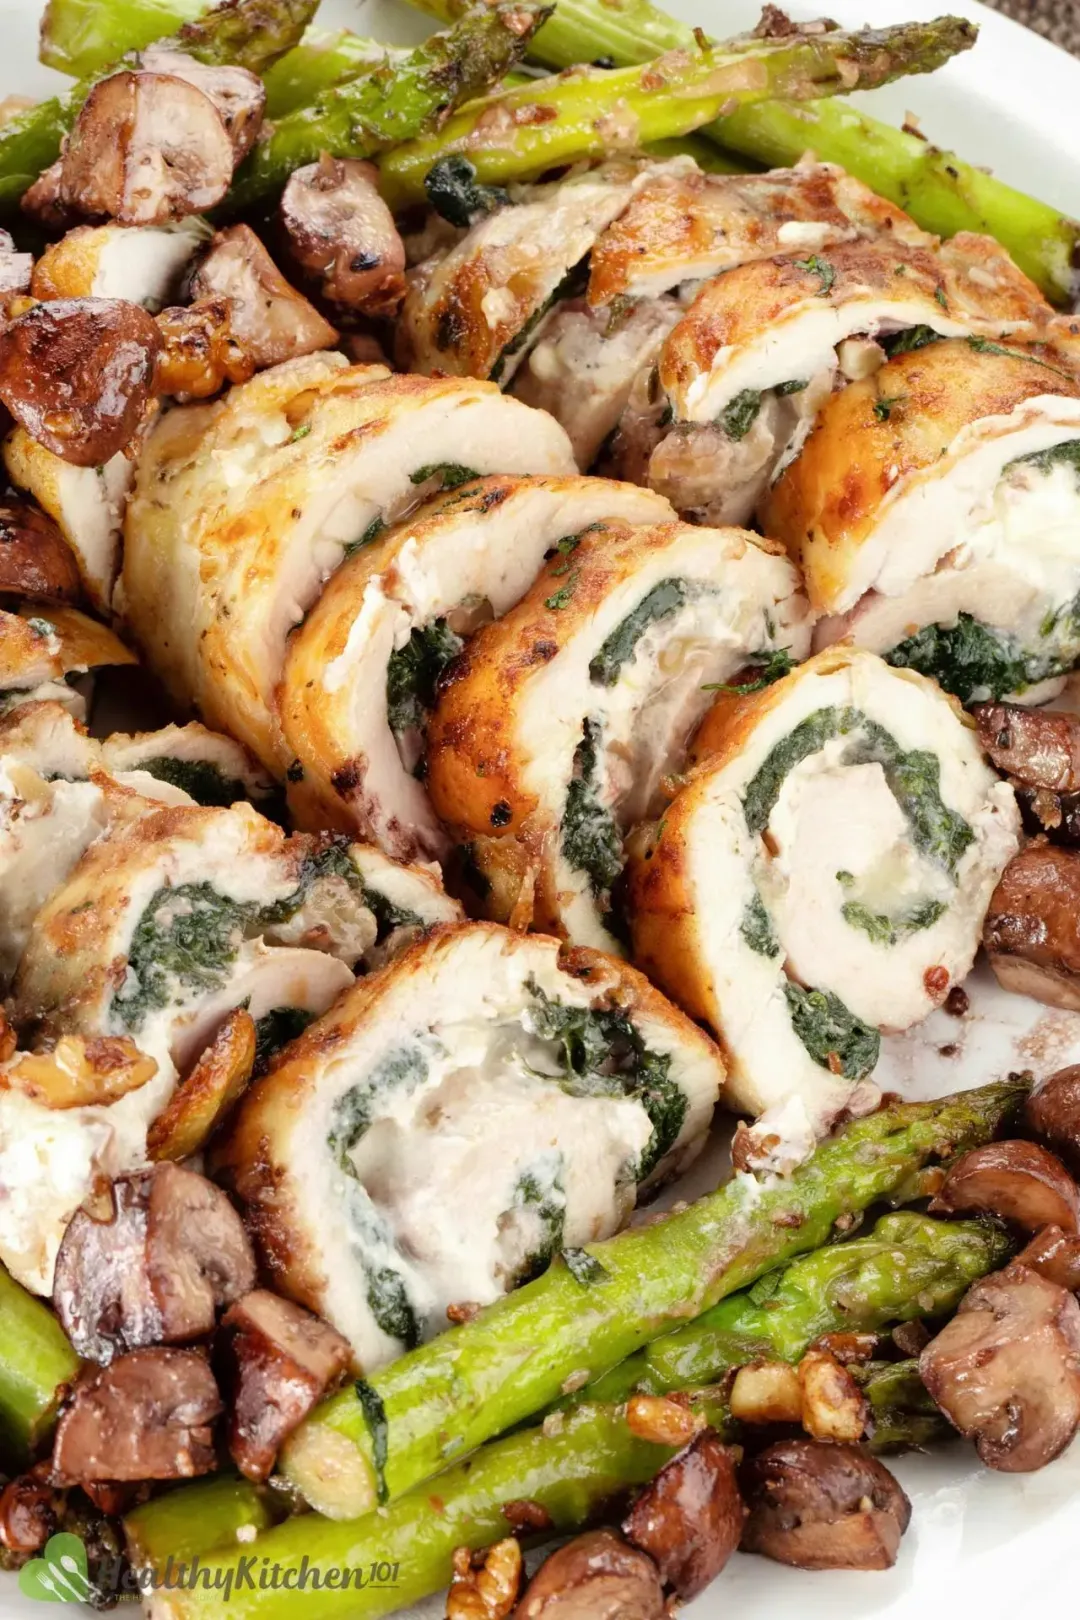 Rolls of chicken breasts stuffed with spinach laid on a bed of aspragus and brown mushrooms.